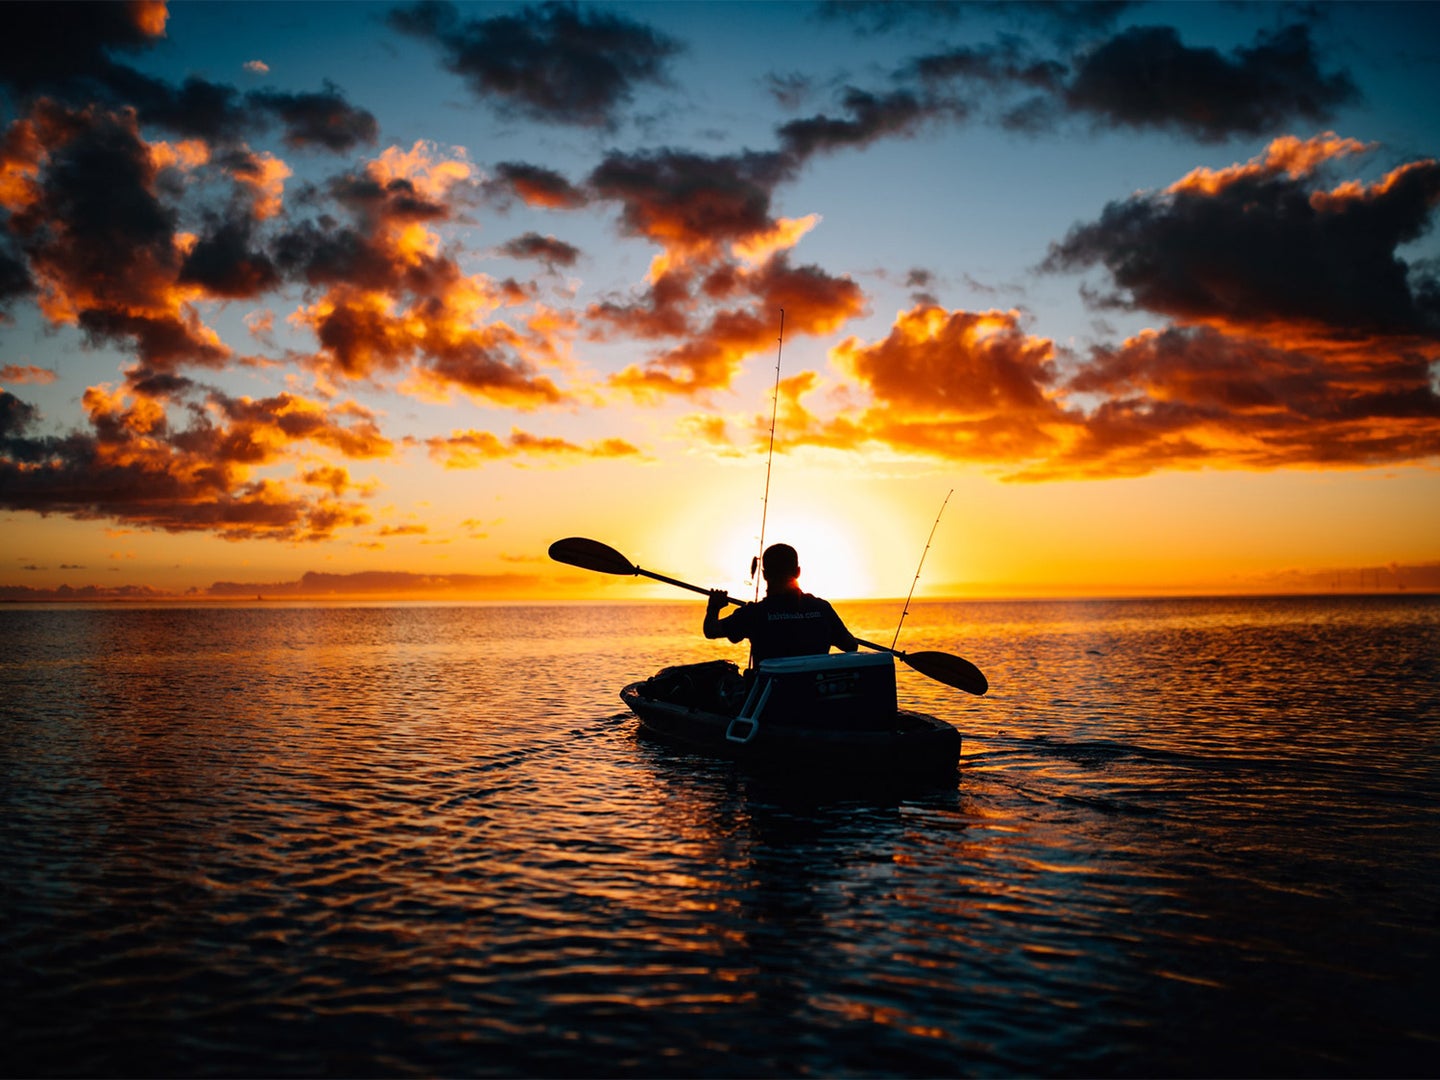 A single person in a canoe paddles across a lake with the sun setting in the background.